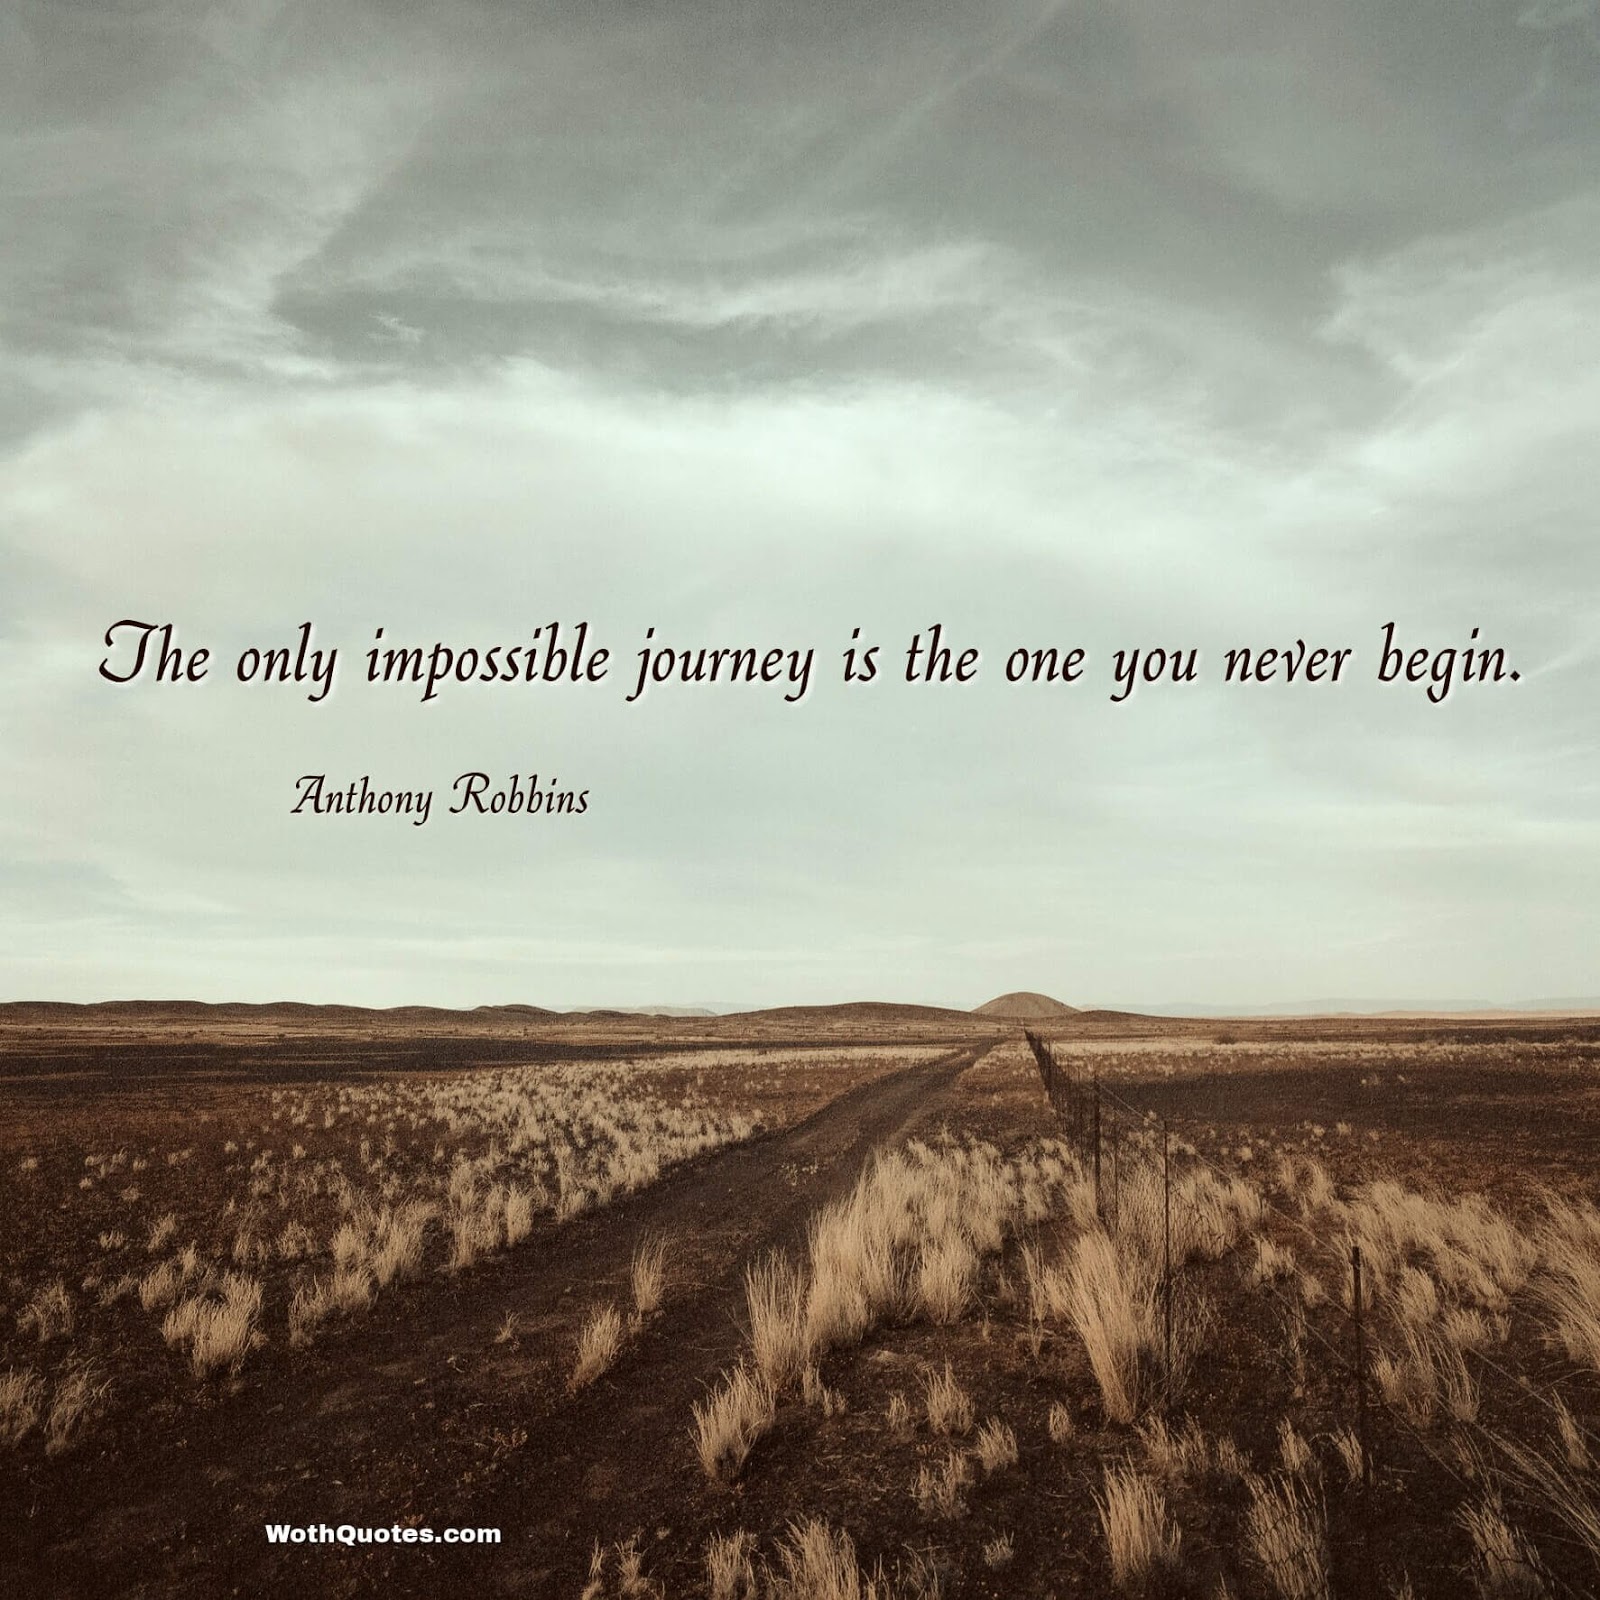 Journey Quotes - Wisdom of Life Journeys | WOTHQUOTES COLLECTION